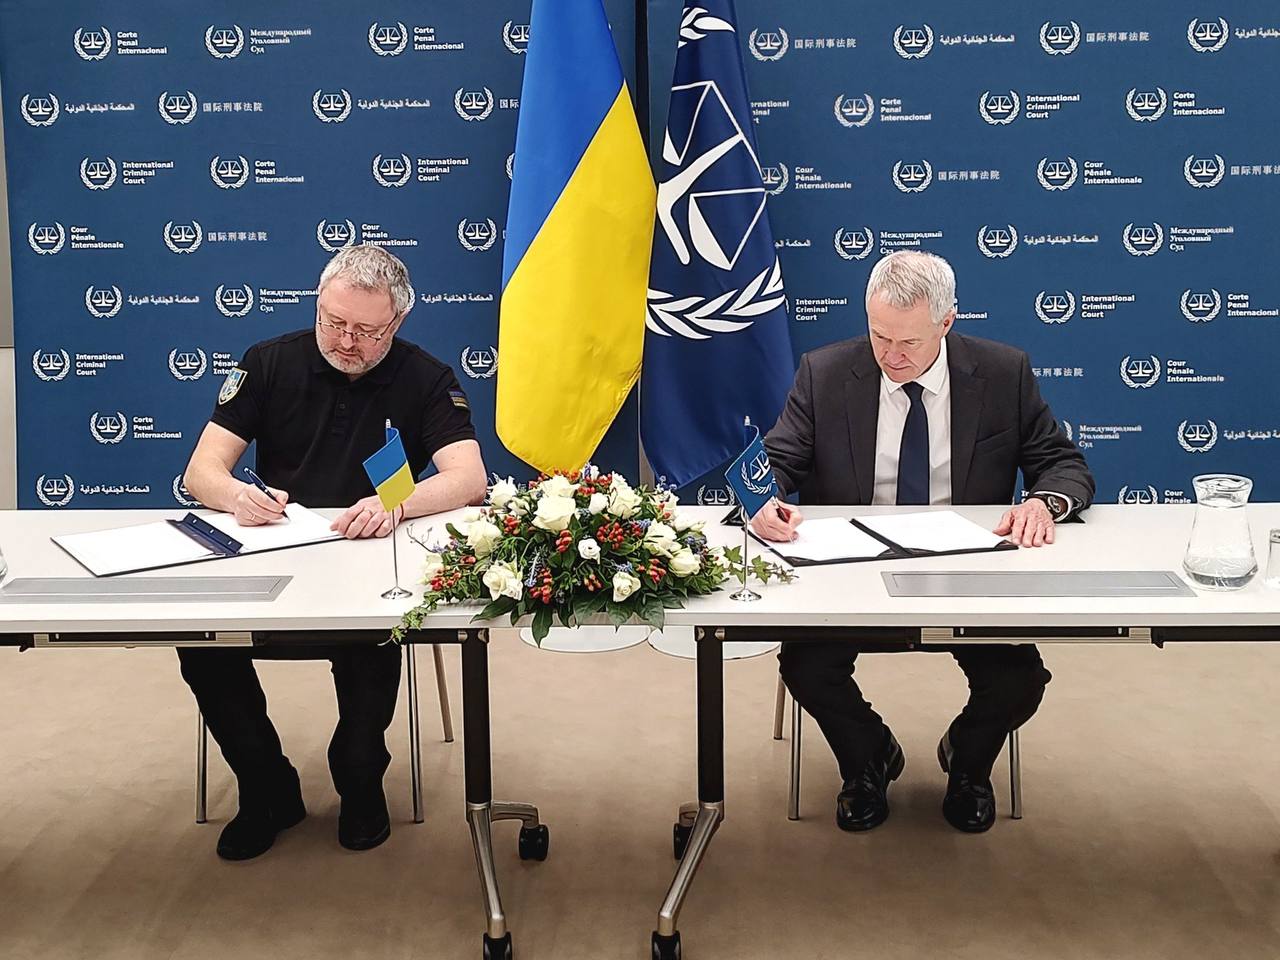 Prosecutor General Andriy Kostin in The Hague signed the Agreement on opening the Representation of the International Criminal Court in Ukraine